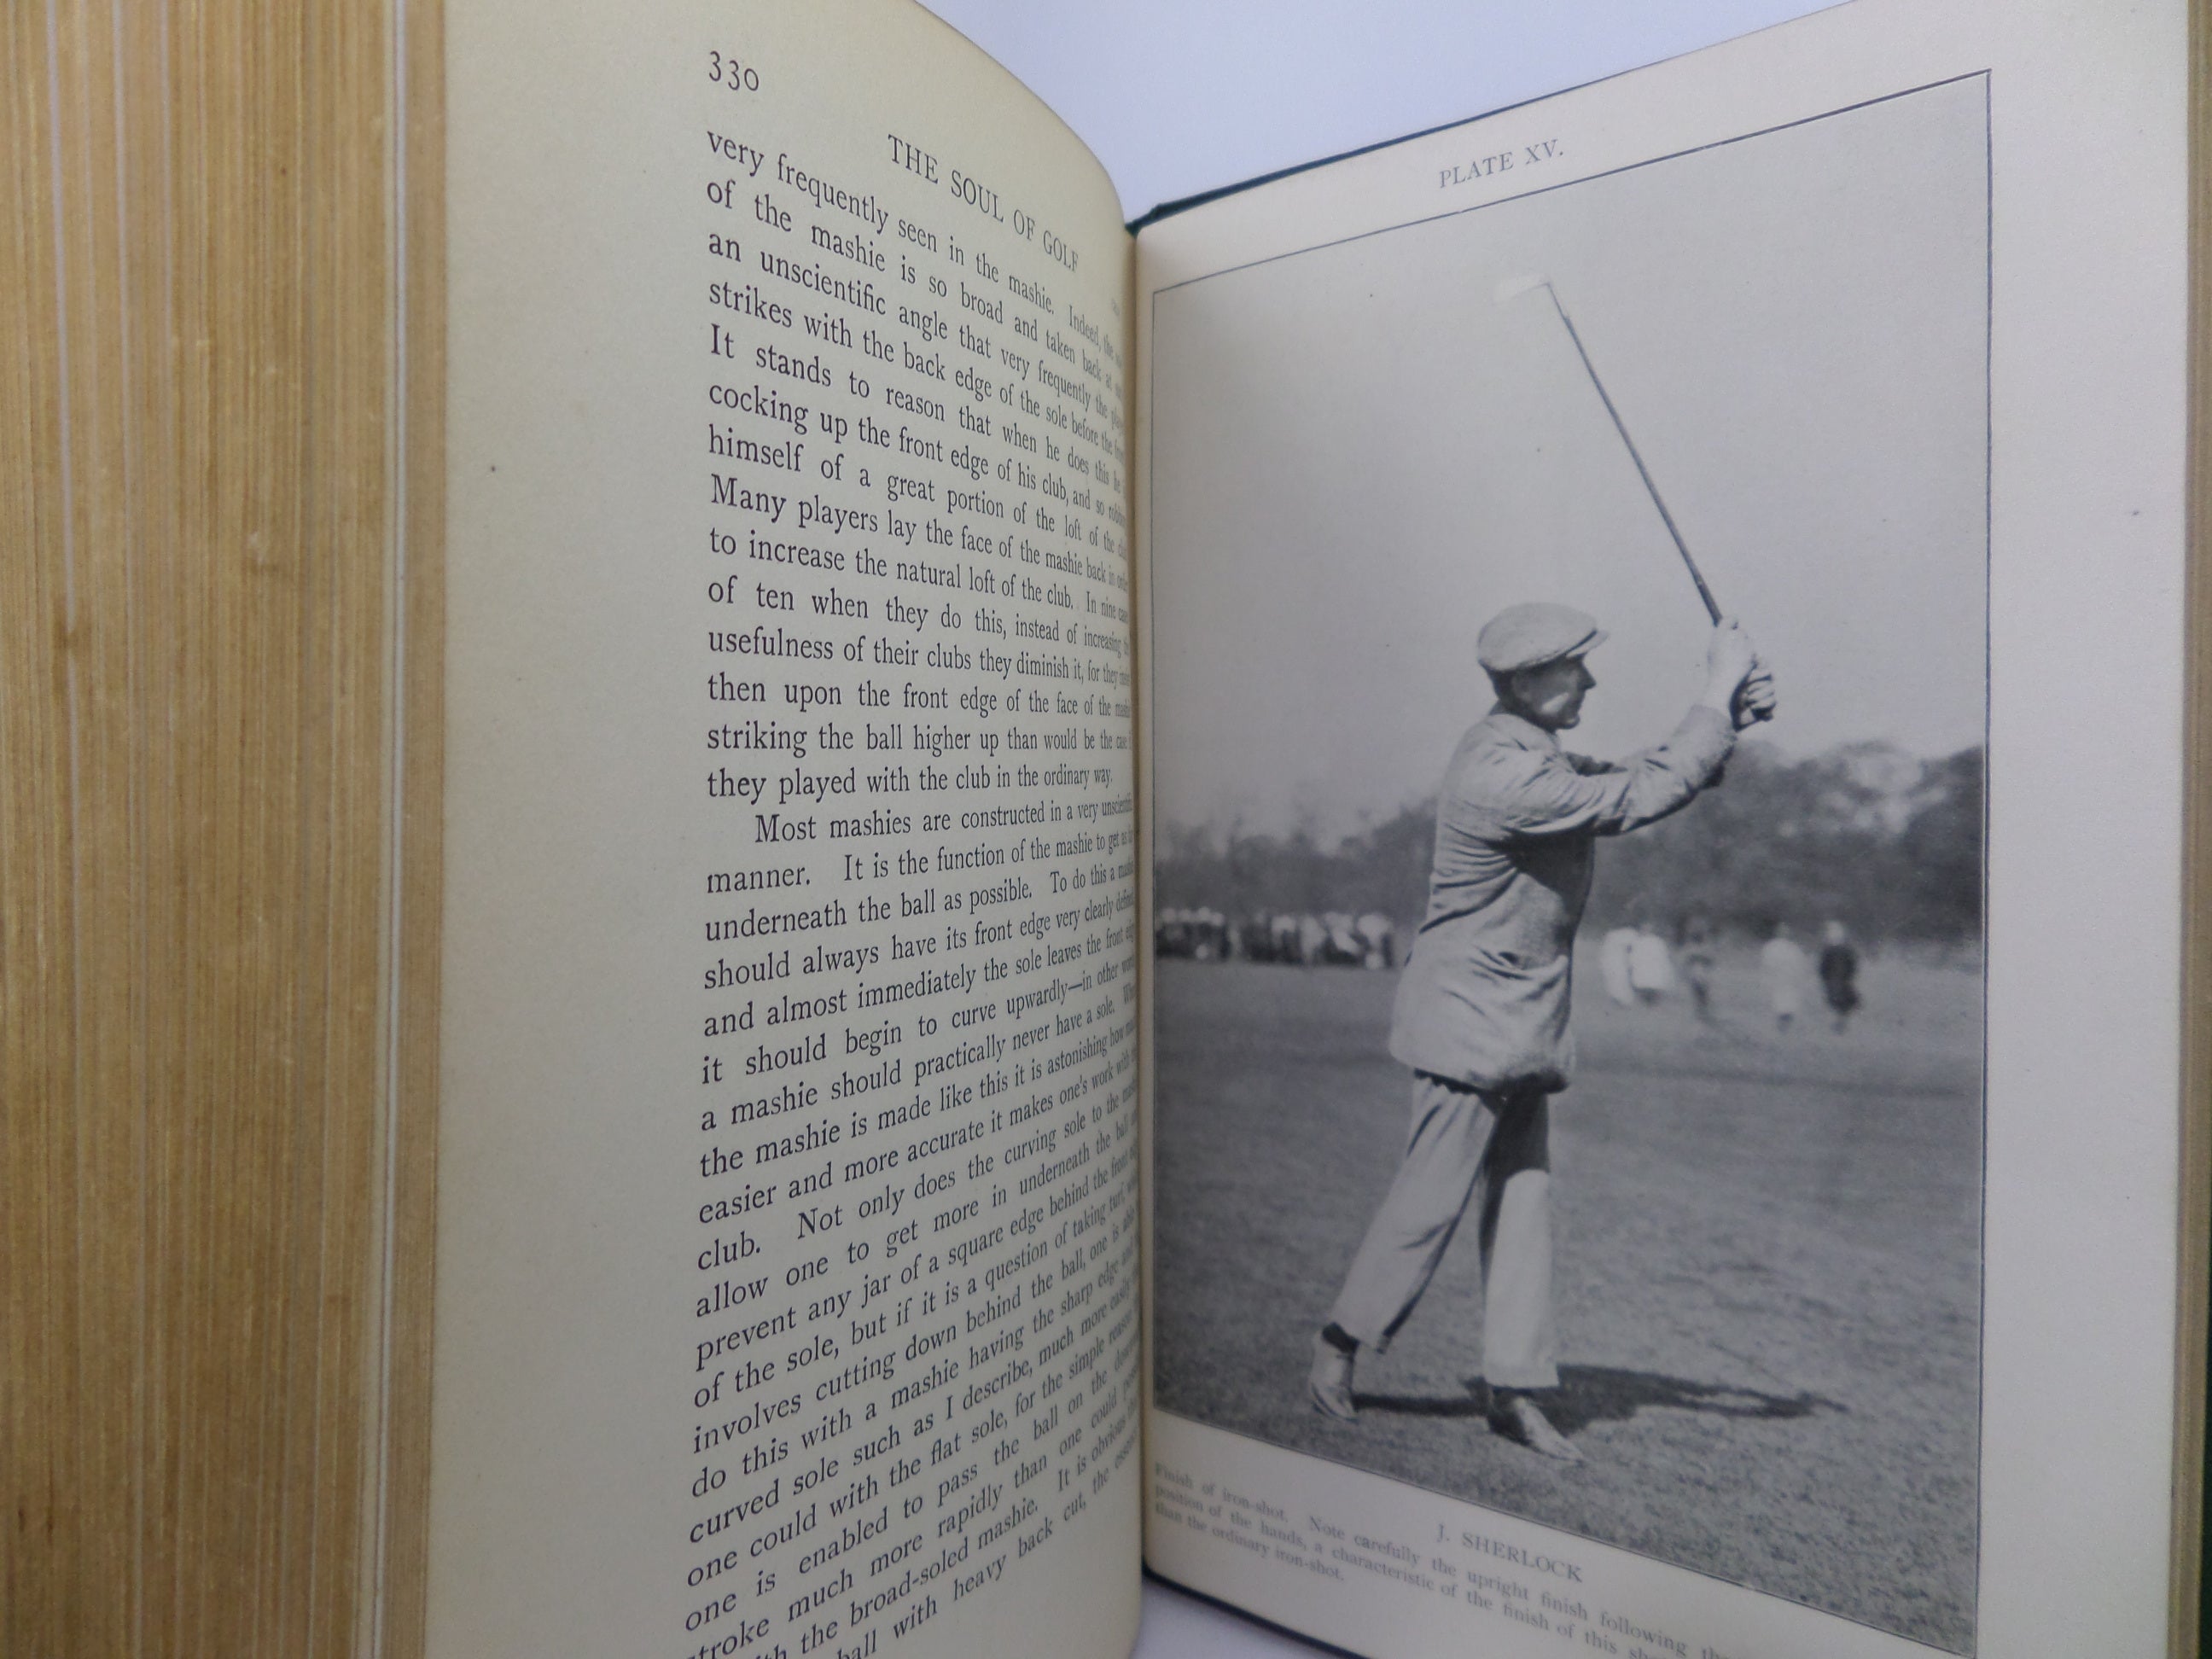 THE SOUL OF GOLF BY P. A. VAILE 1912 FIRST EDITION